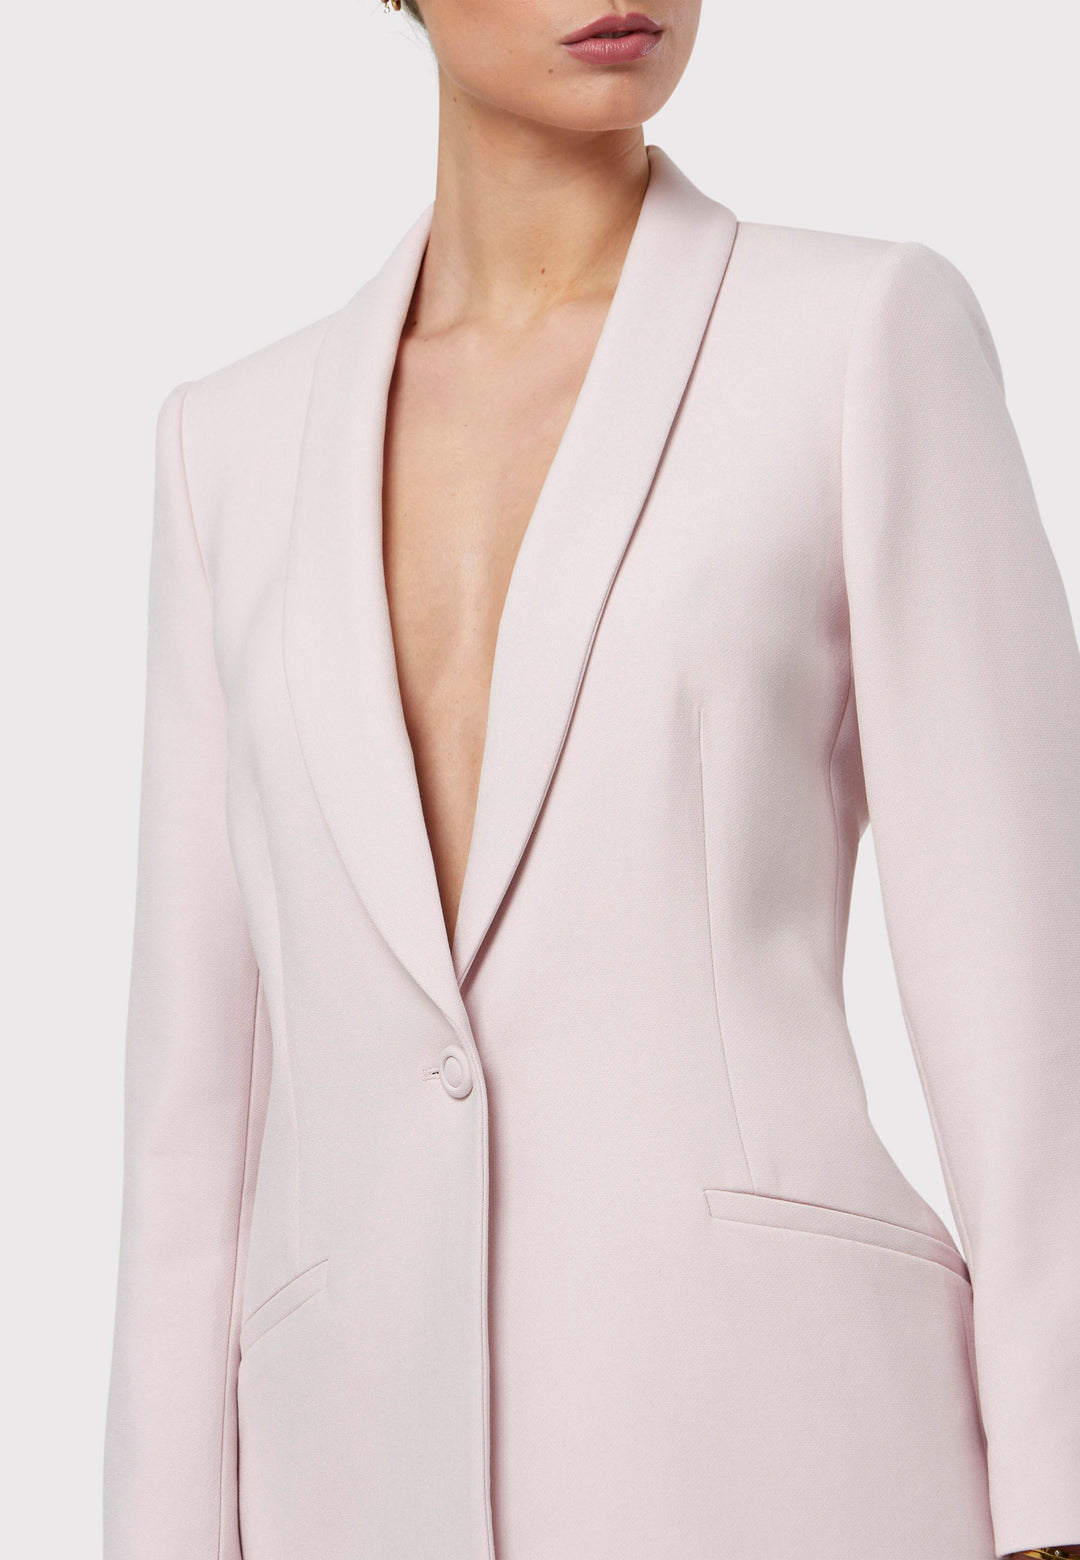 Meet the Darcie Soft Pink Jacket, a chic choice for minimalists. This tuxedo-style jacket boasts a seamless shawl collar, sleek welt pockets, and a flattering semi-fitted silhouette with a single-button closure. Crafted from our signature fabric blend, it offers comfort with a hint of stretch. Pair it with the matching Naomi Soft Pink Tailored Trouser for a complete, polished look.